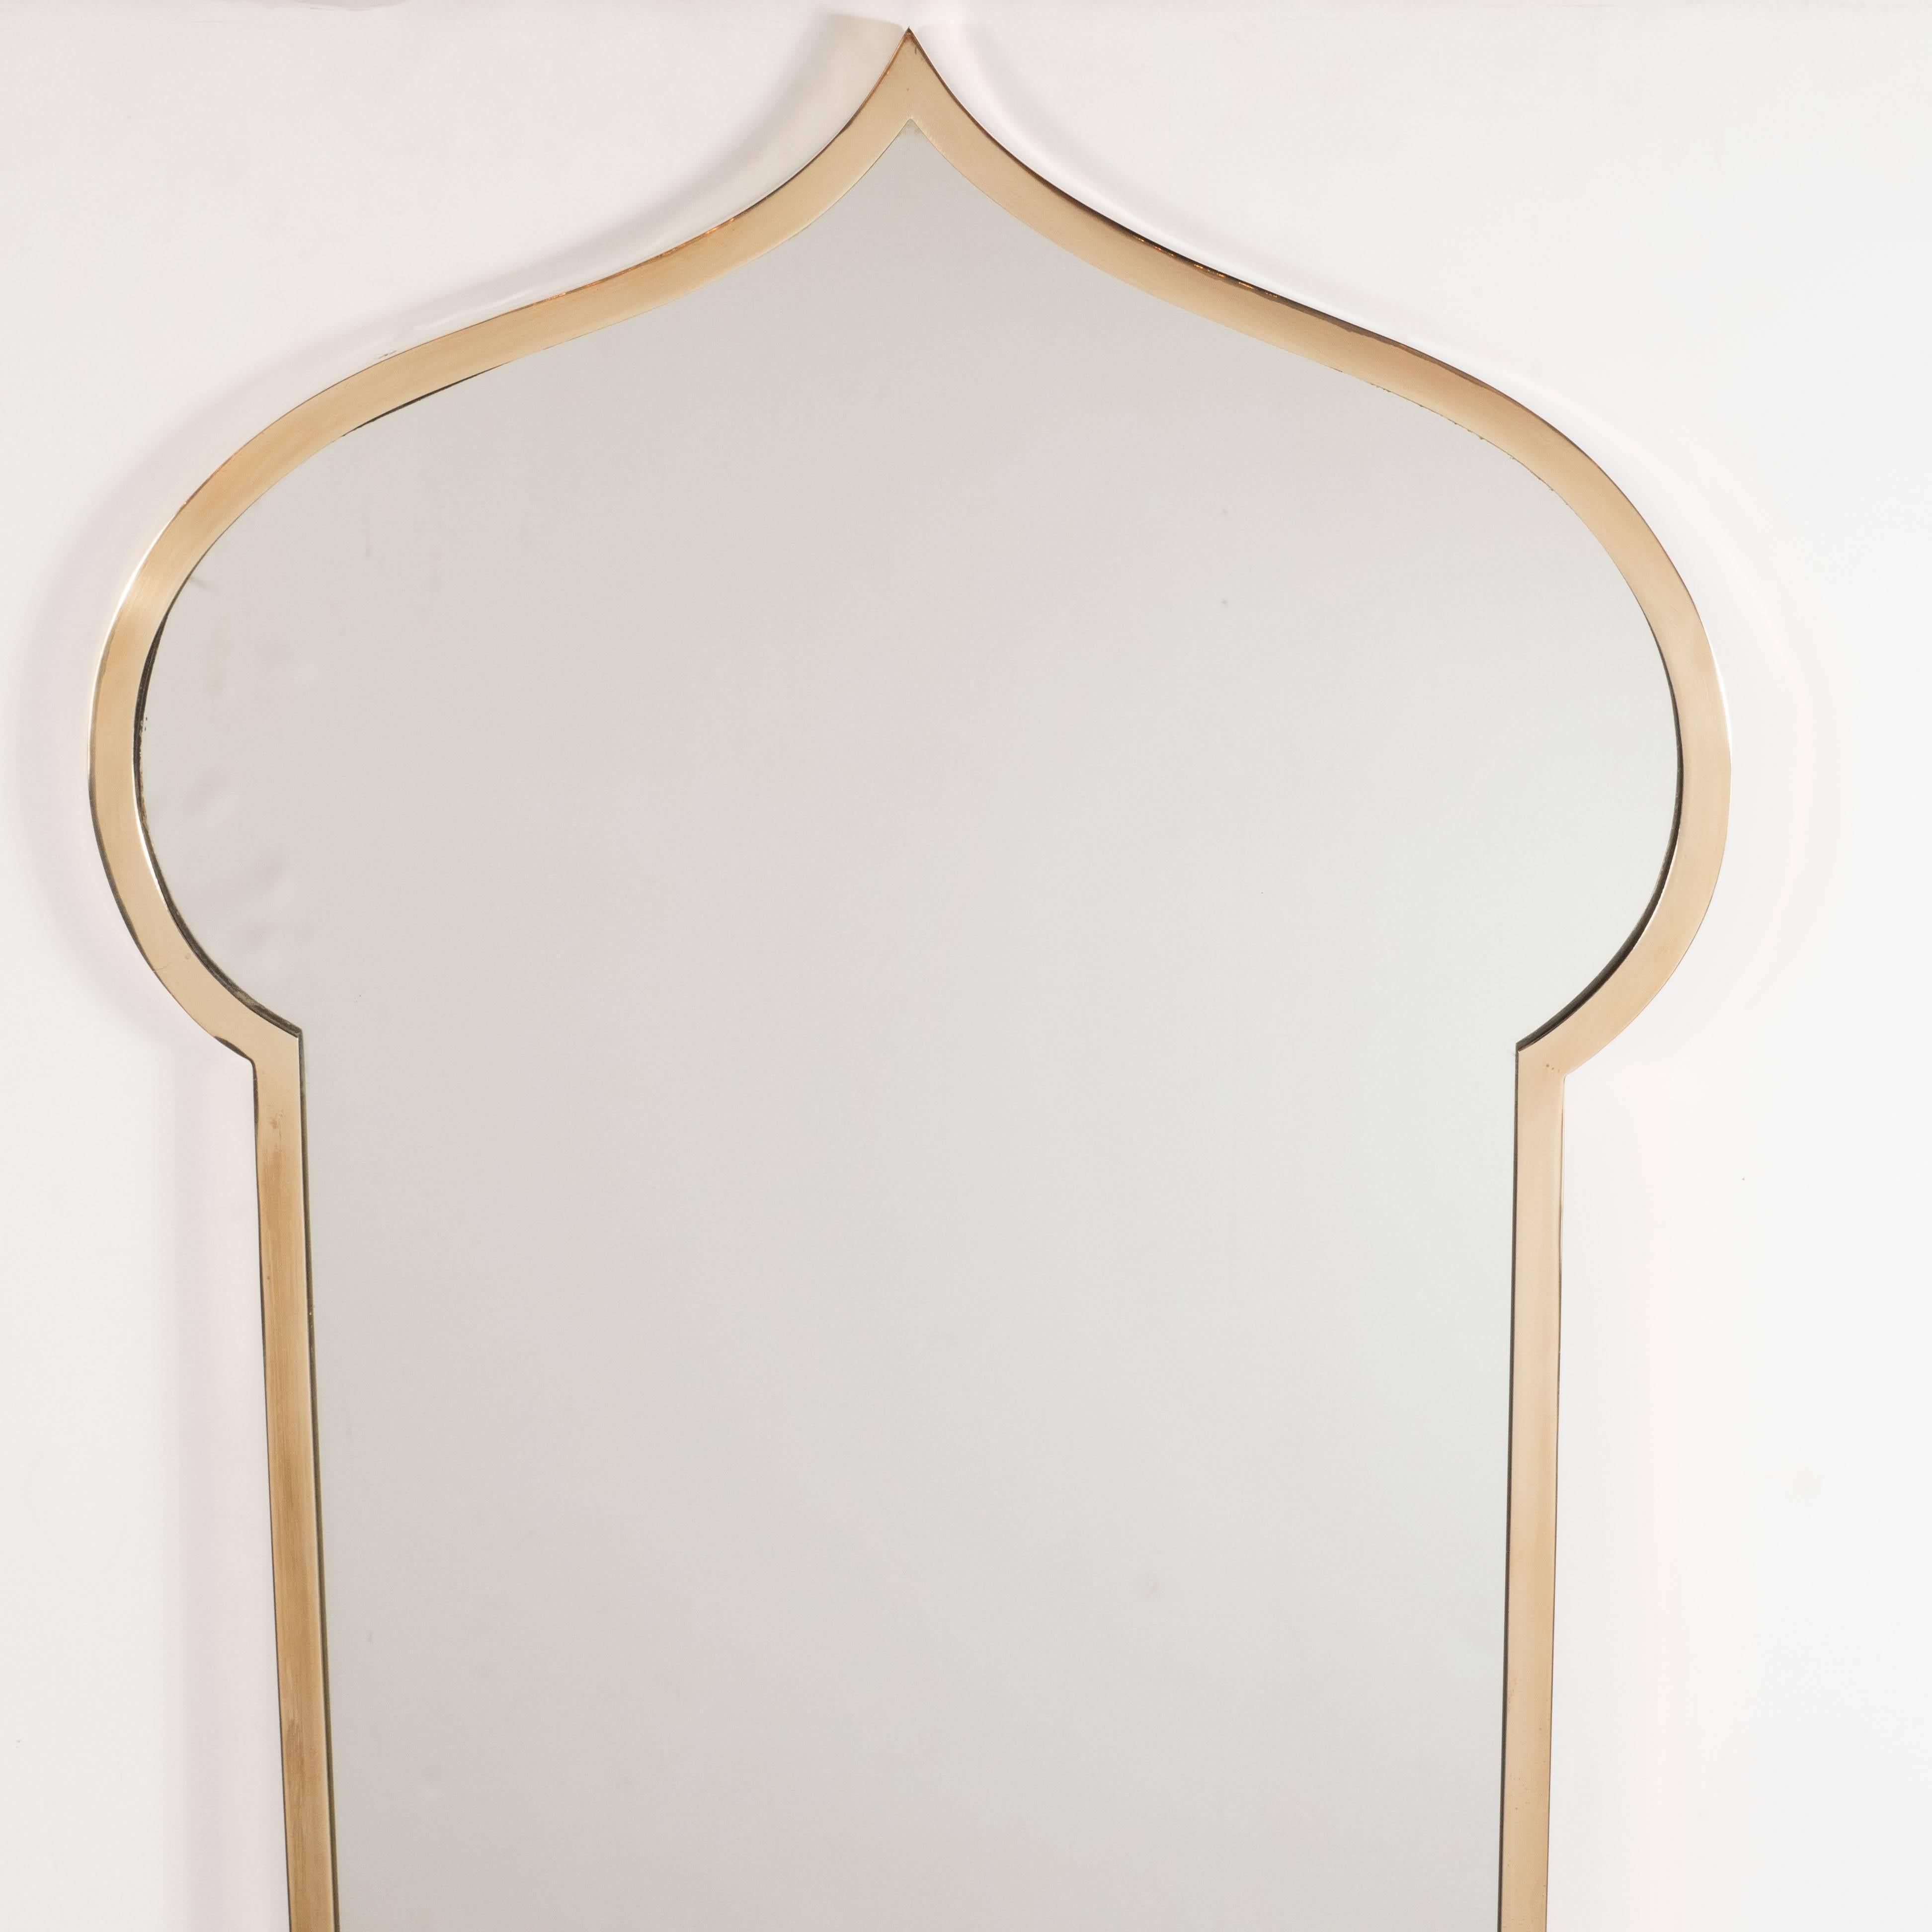 This handsome and refined pair of Mid-Century Modern mirrors were realized in Italy, circa 1960. They feature rectangular bodies that dramatically expand outwards near their apex creating rounded sides and then receding to point. This bell-shaped